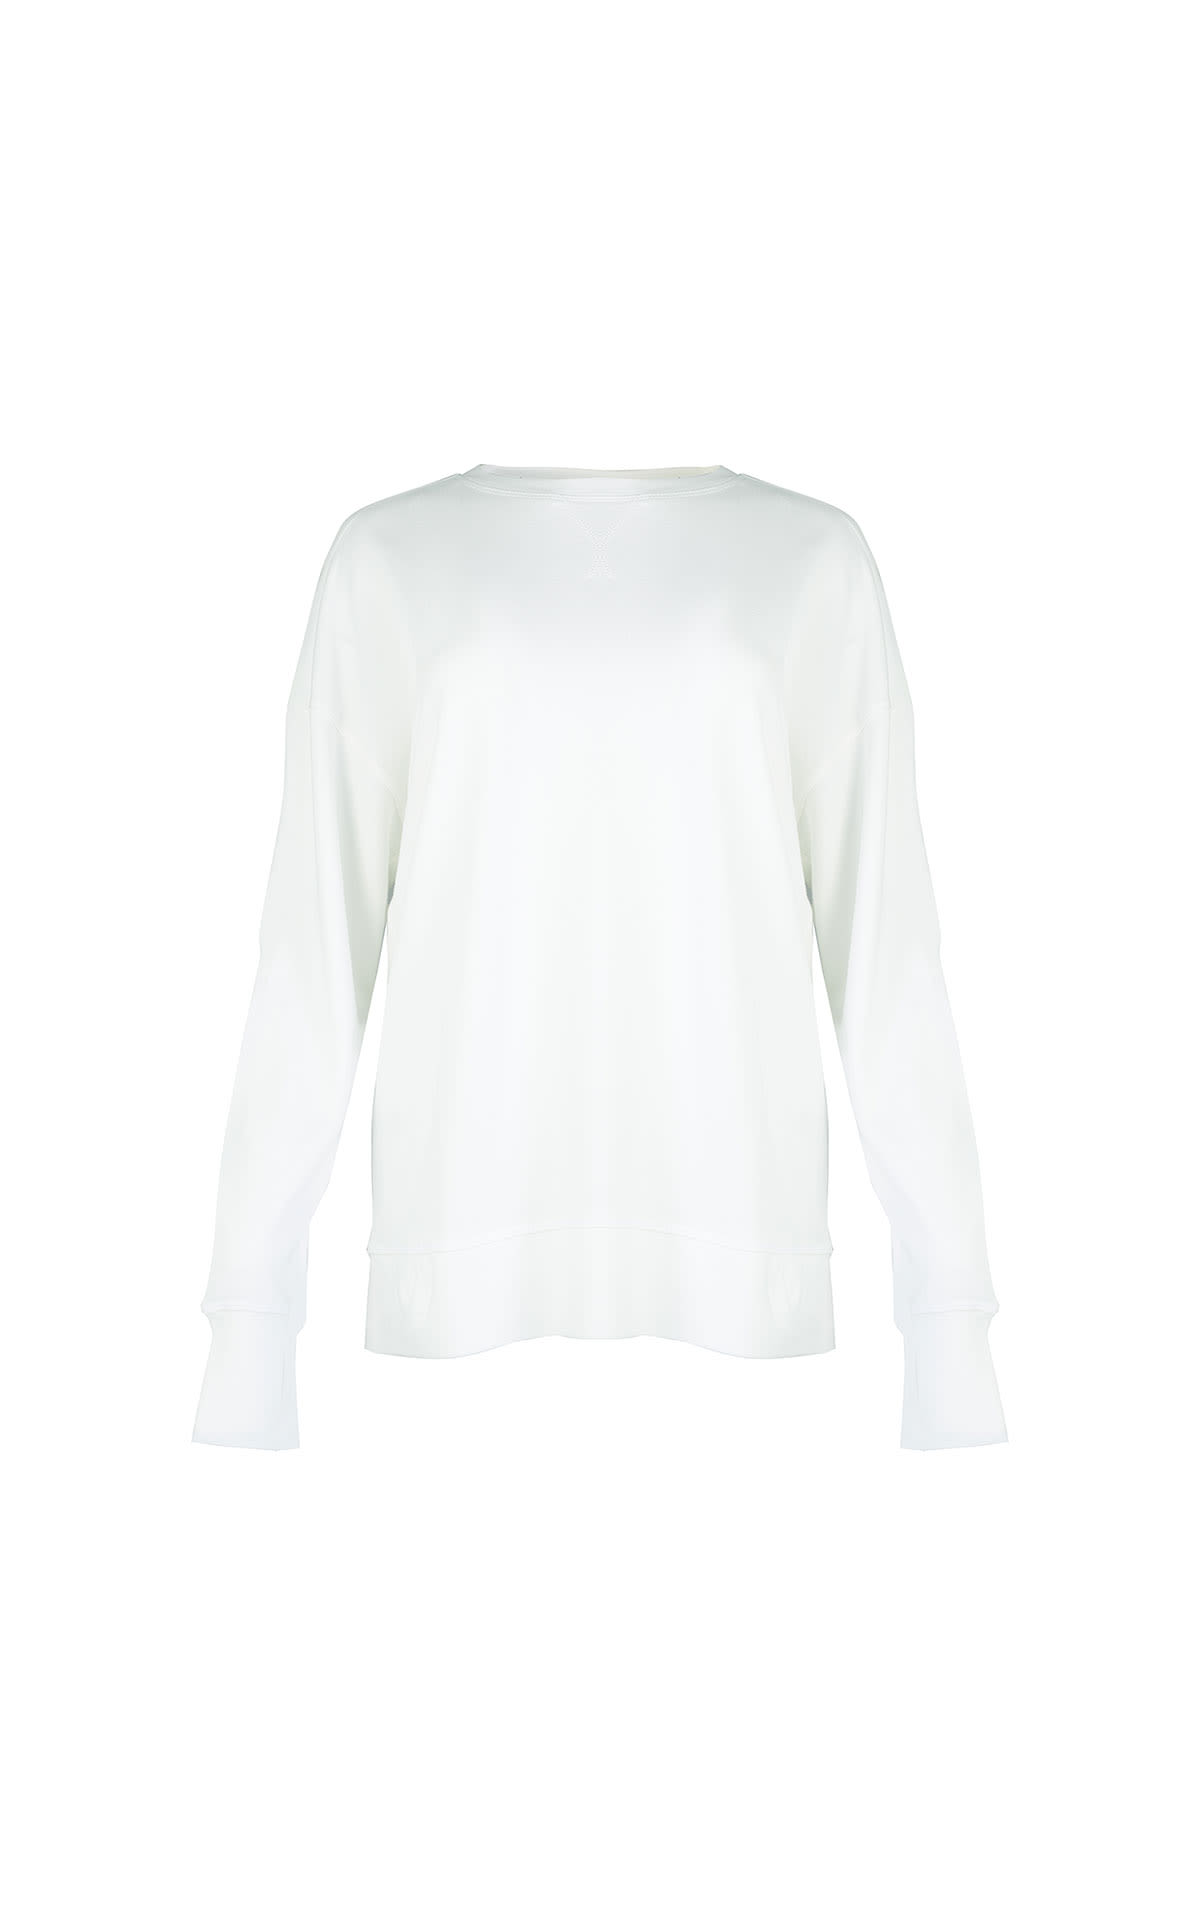 Sweaty Betty After class split sweatshirt Lily white from Bicester Village